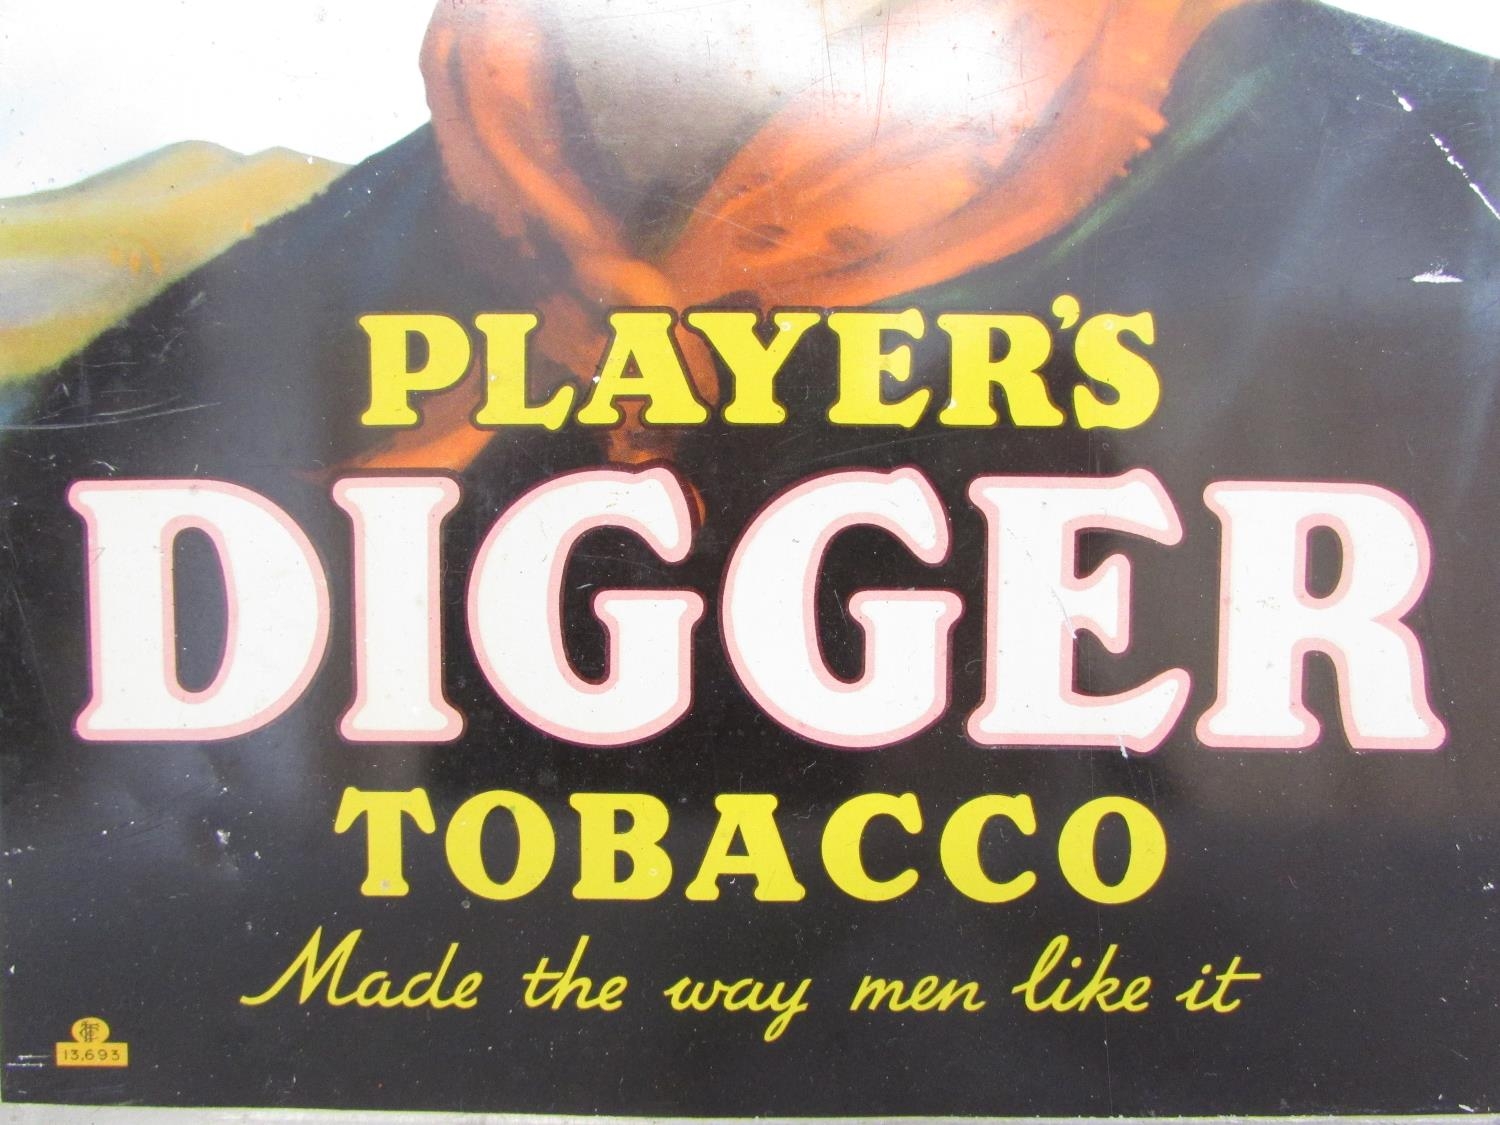 A Player’s Digger Tobacco “ Made The Way Men Like It” tin advertisement sign, 28cm x19cm. - Image 2 of 3